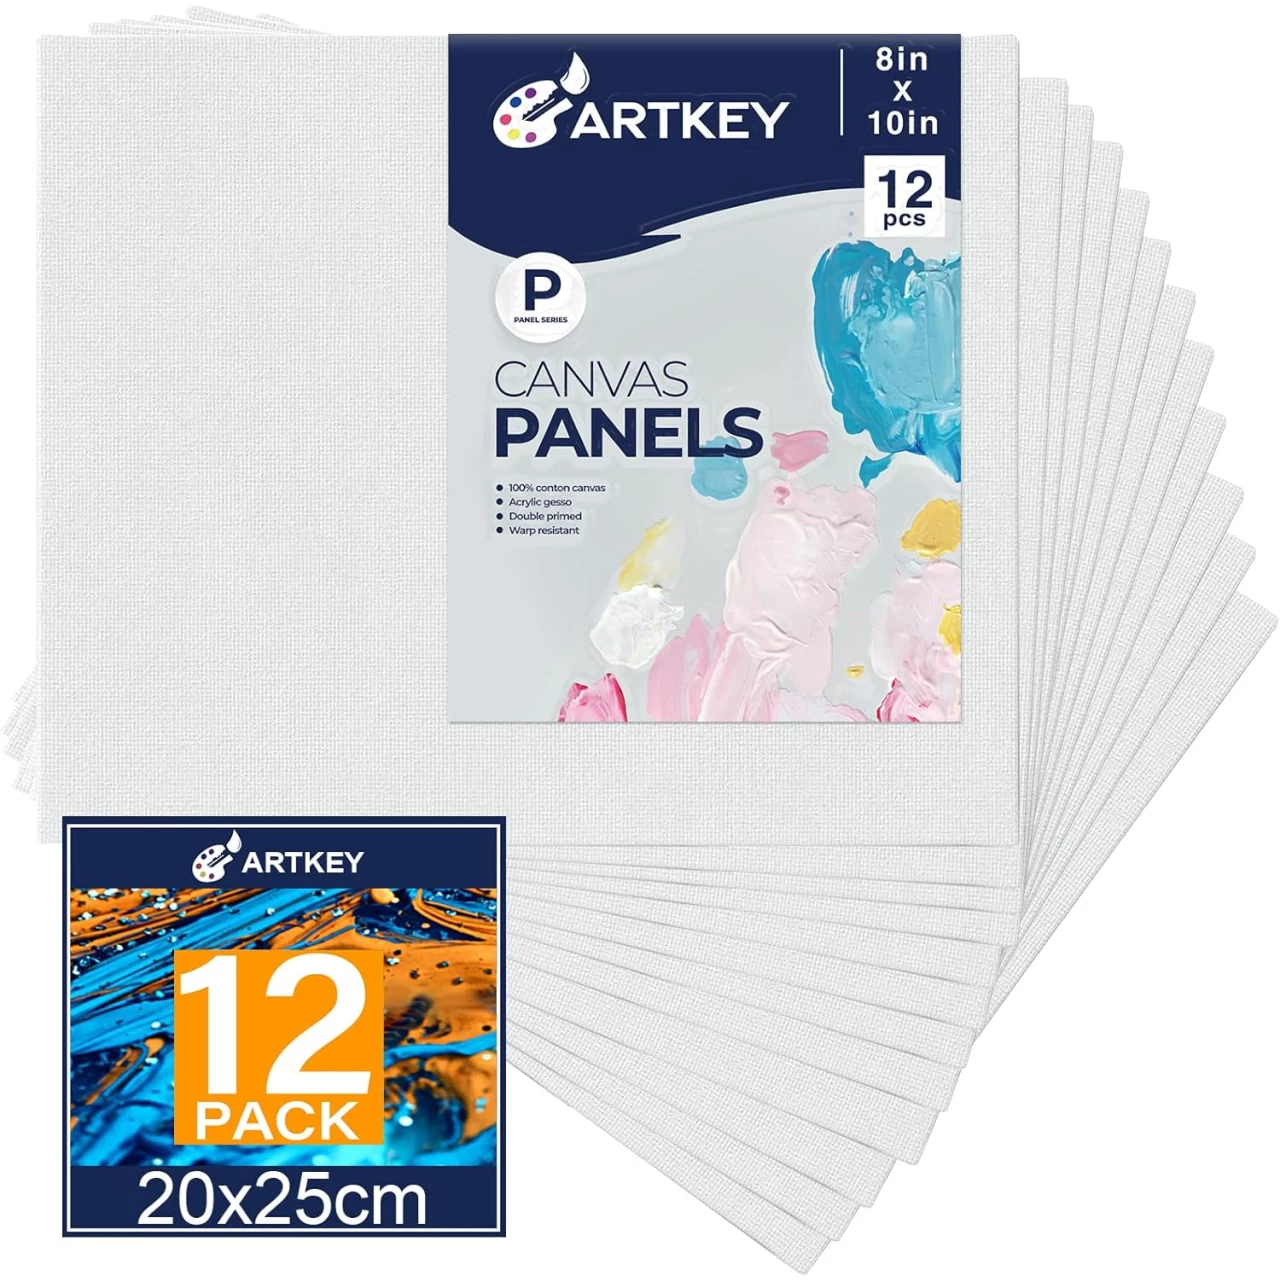 Canvas Panels 8x10 Inch 12-Pack, 10 oz Double Primed Acid-Free 100% Cotton Paint Canvases for Painting